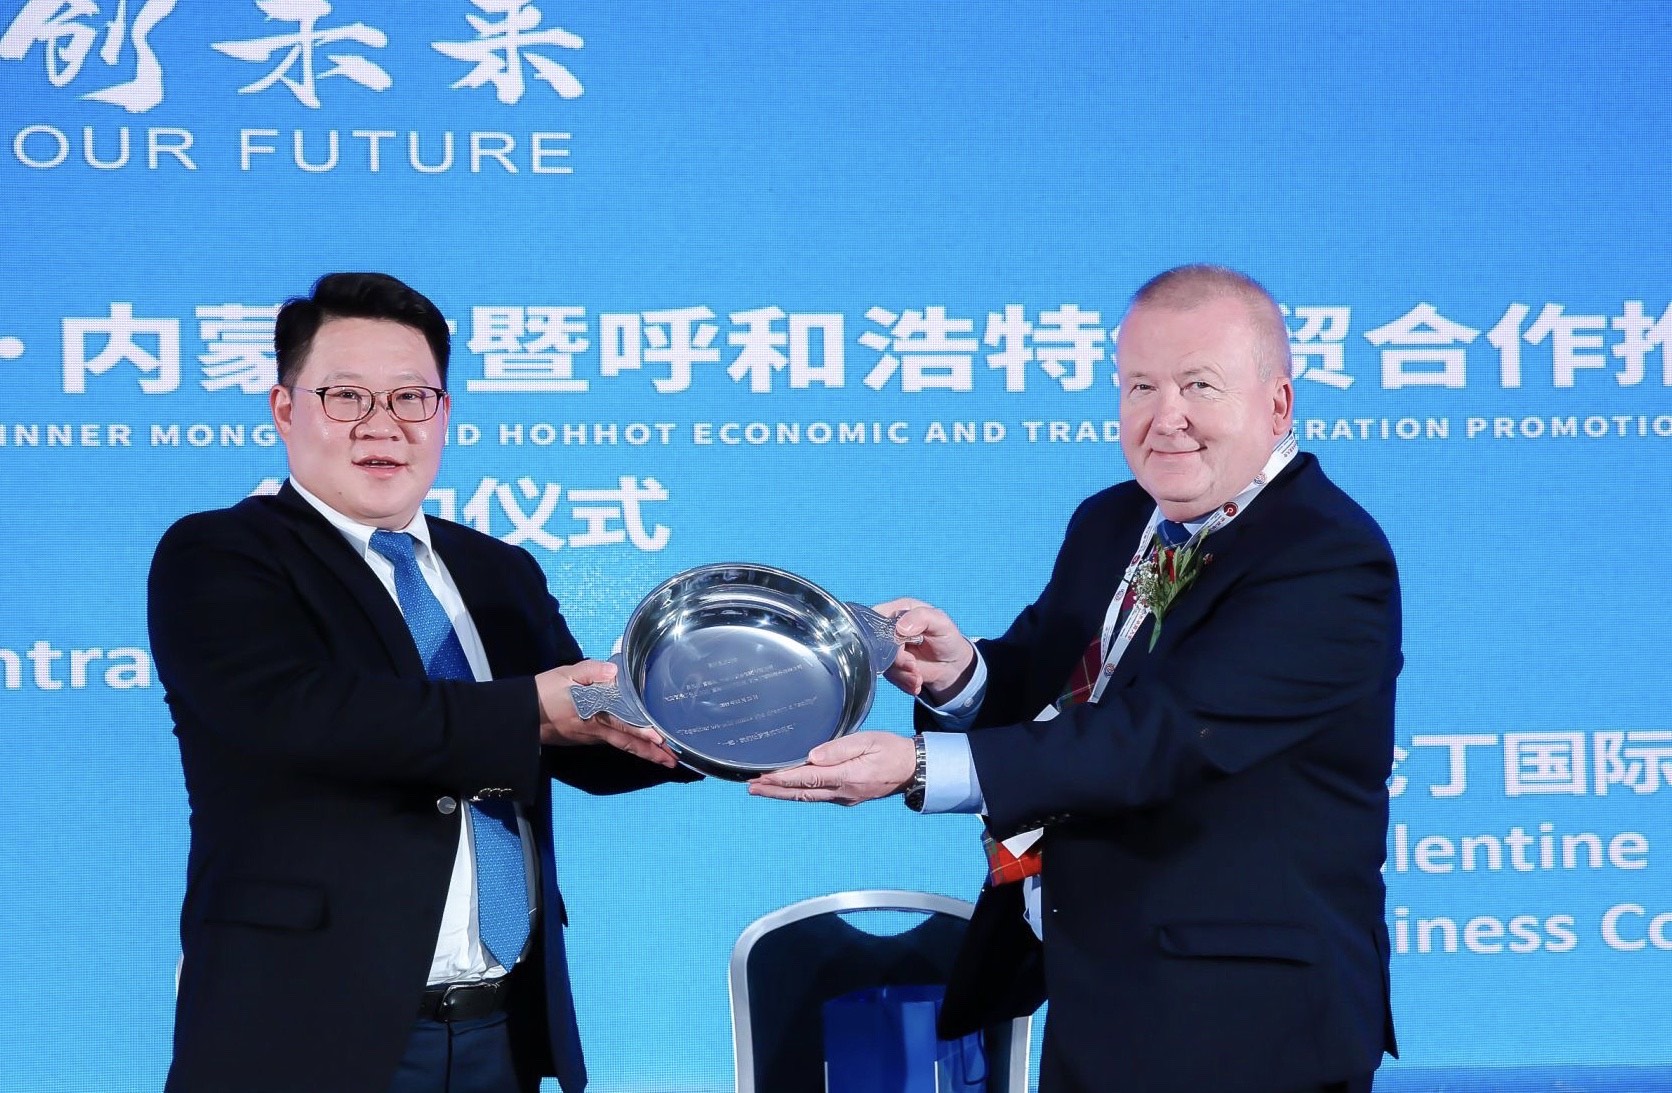 And finally... Forfar company making history in Inner Mongolia with distillery contract